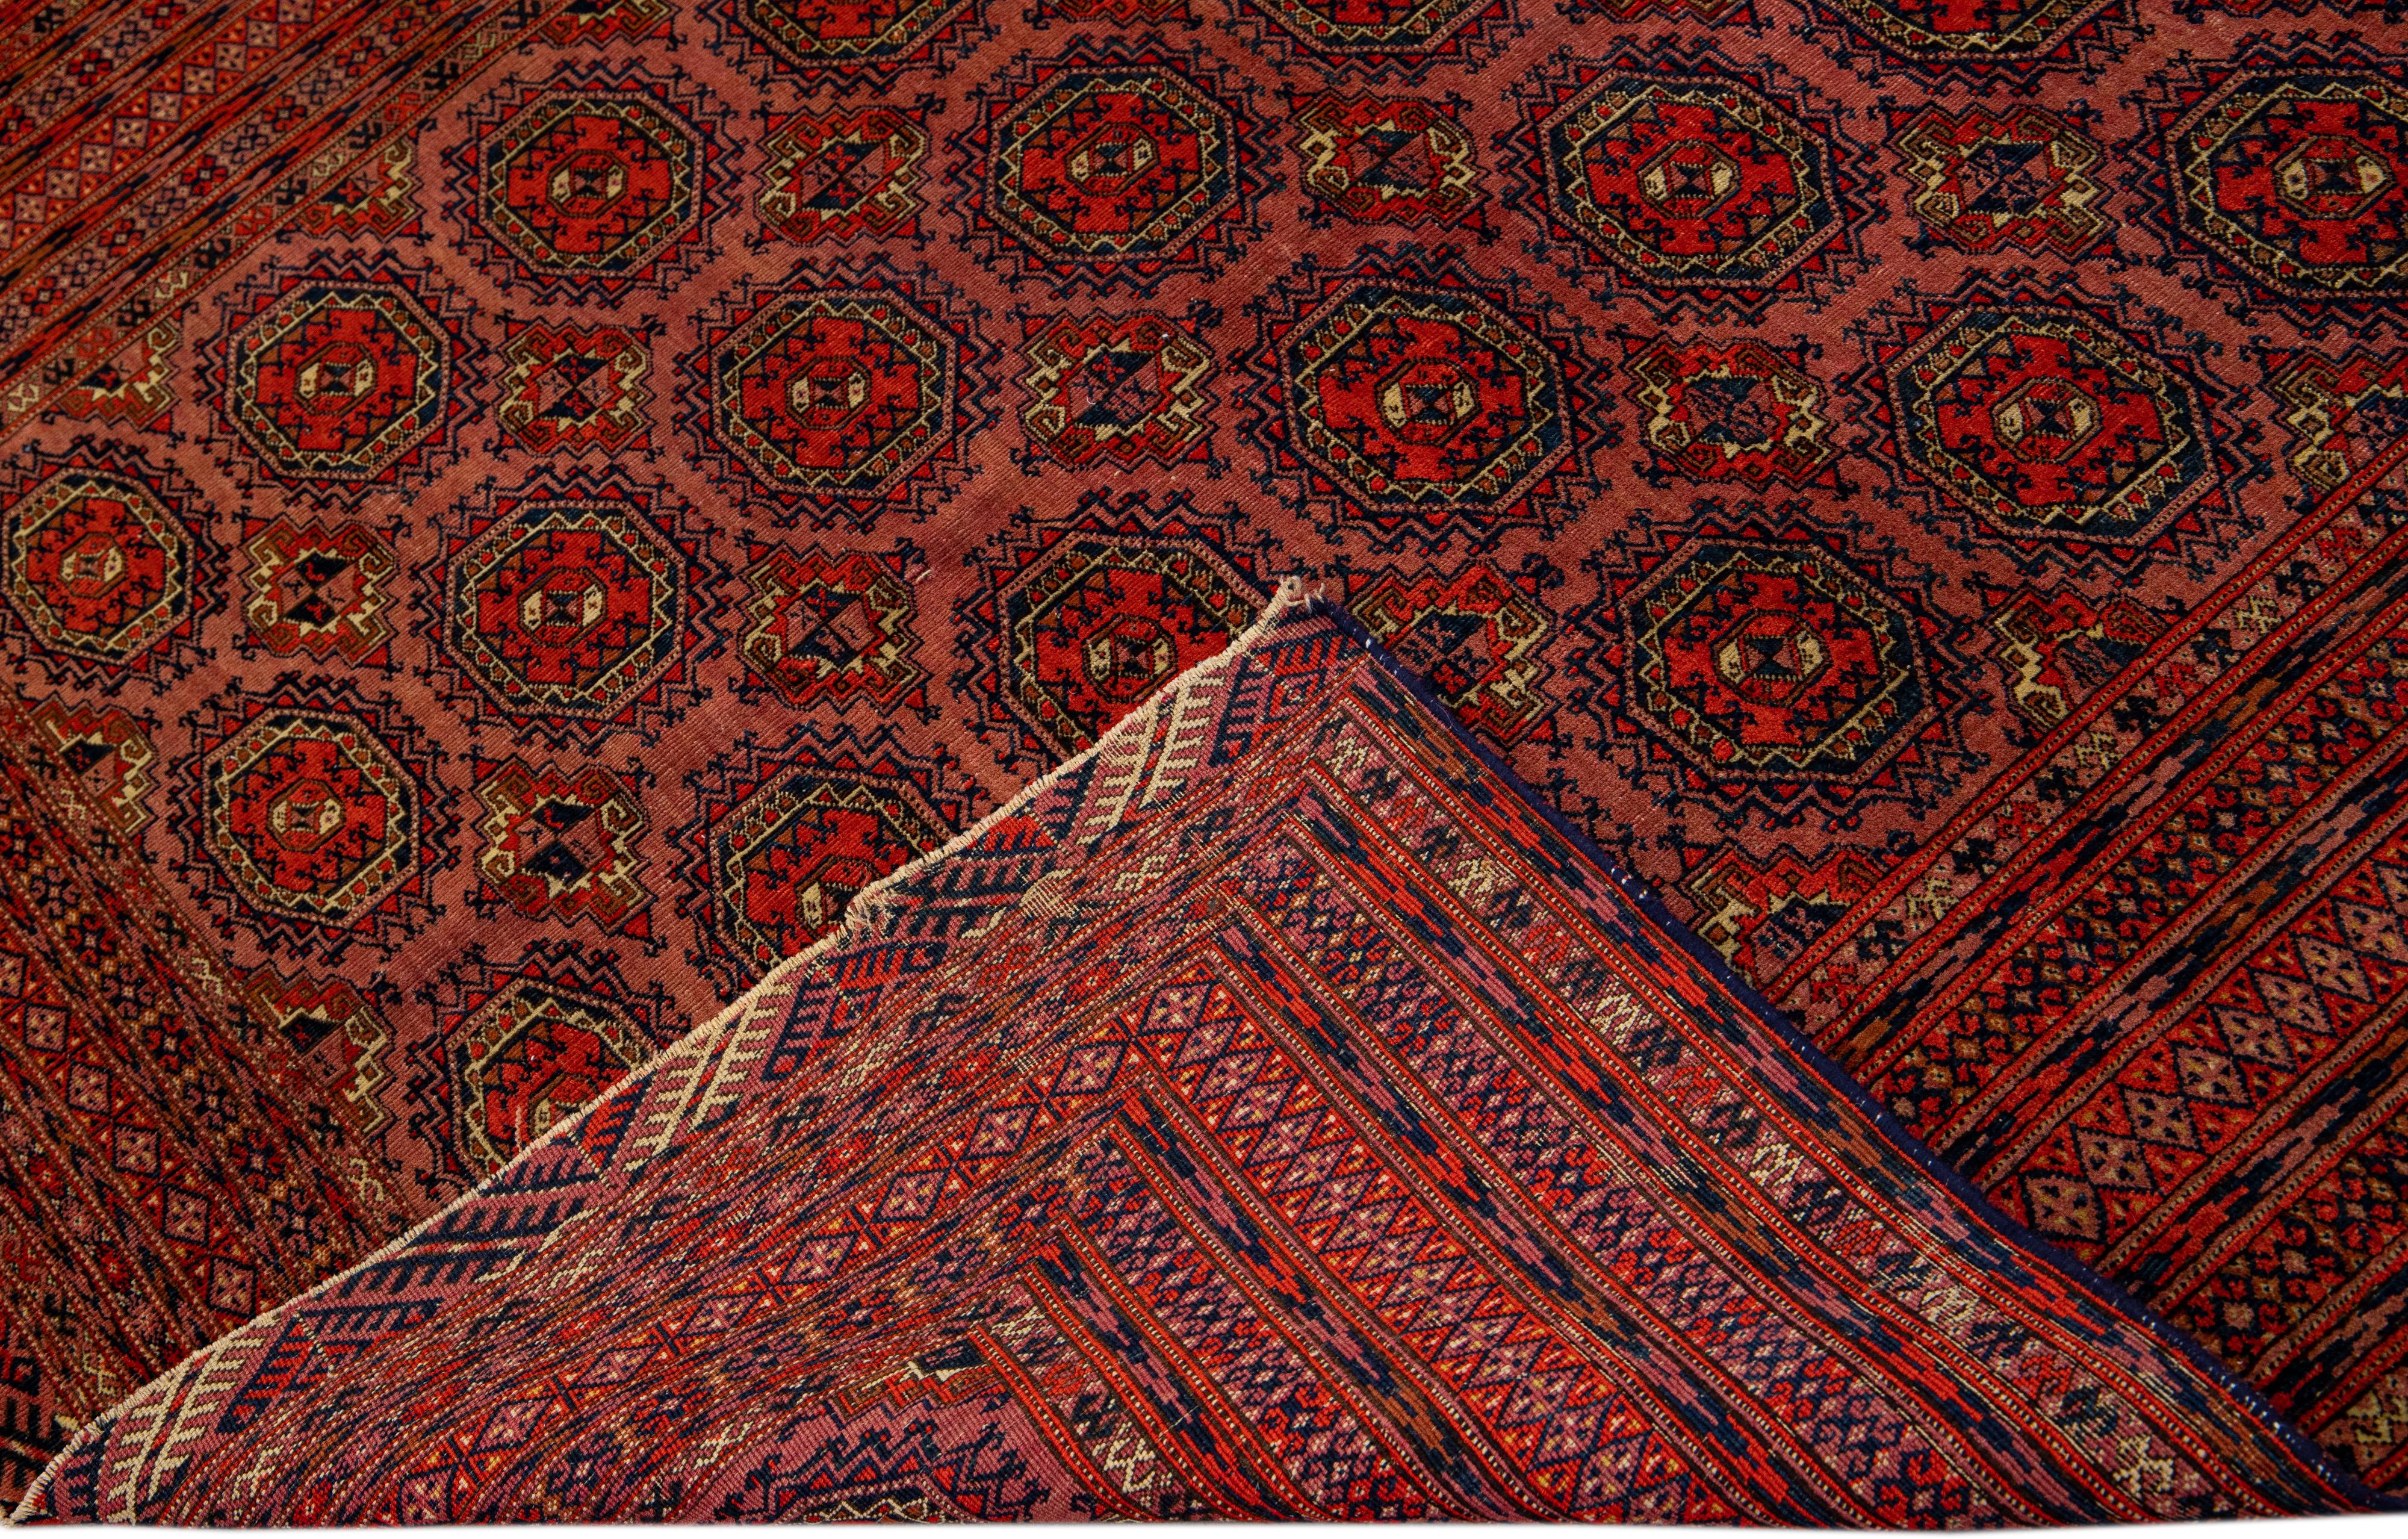 Beautiful vintage Turkmen hand-knotted wool rug with a terracotta field. This Persian rug has navy blue and red accents in a gorgeous all-over geometric Pattern Design.

This rug measures: 5'6